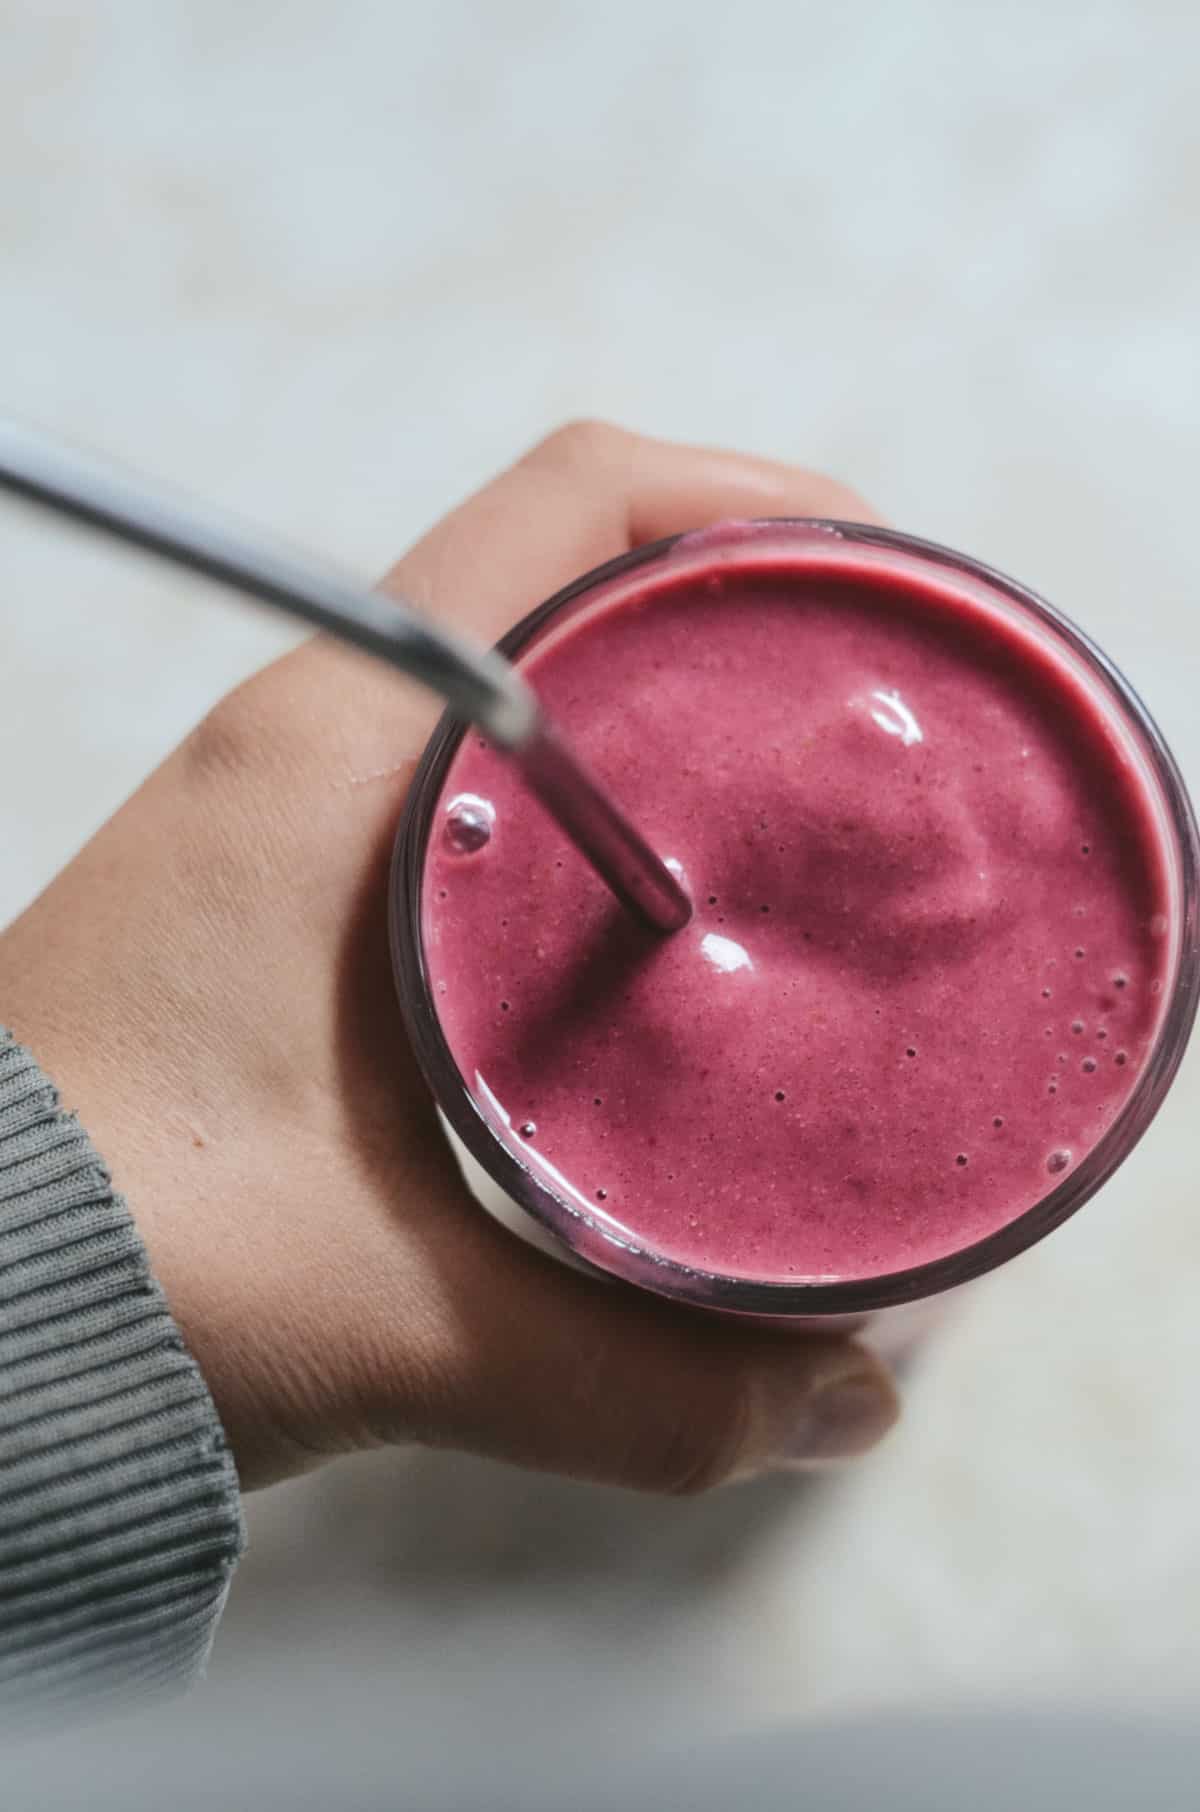 Hand holding cup with pink smoothie.